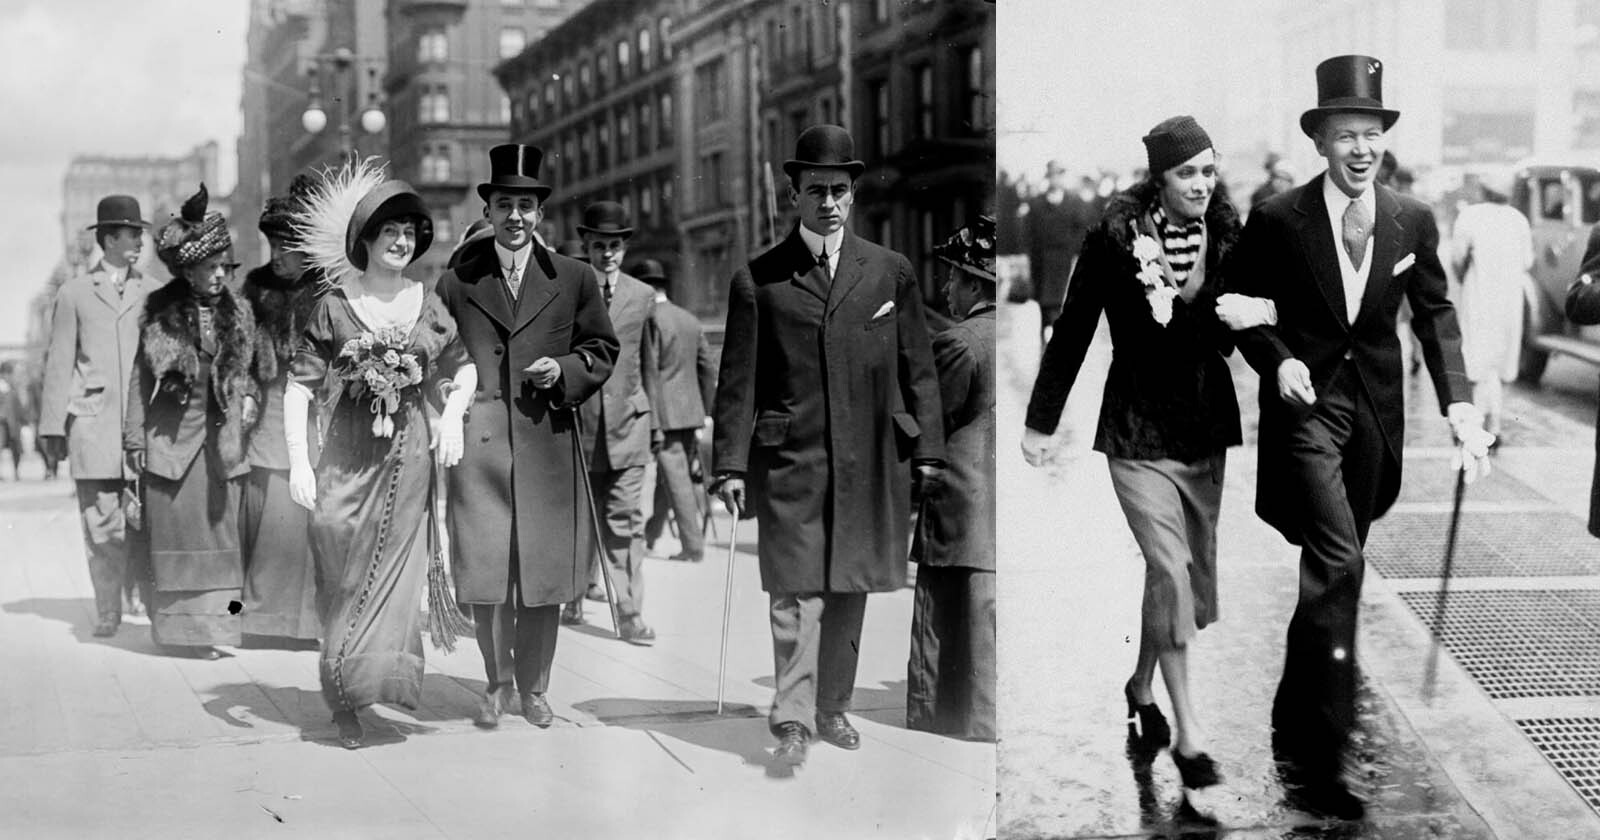 Historic Photos of New York Socialites Attending the Easter Parade